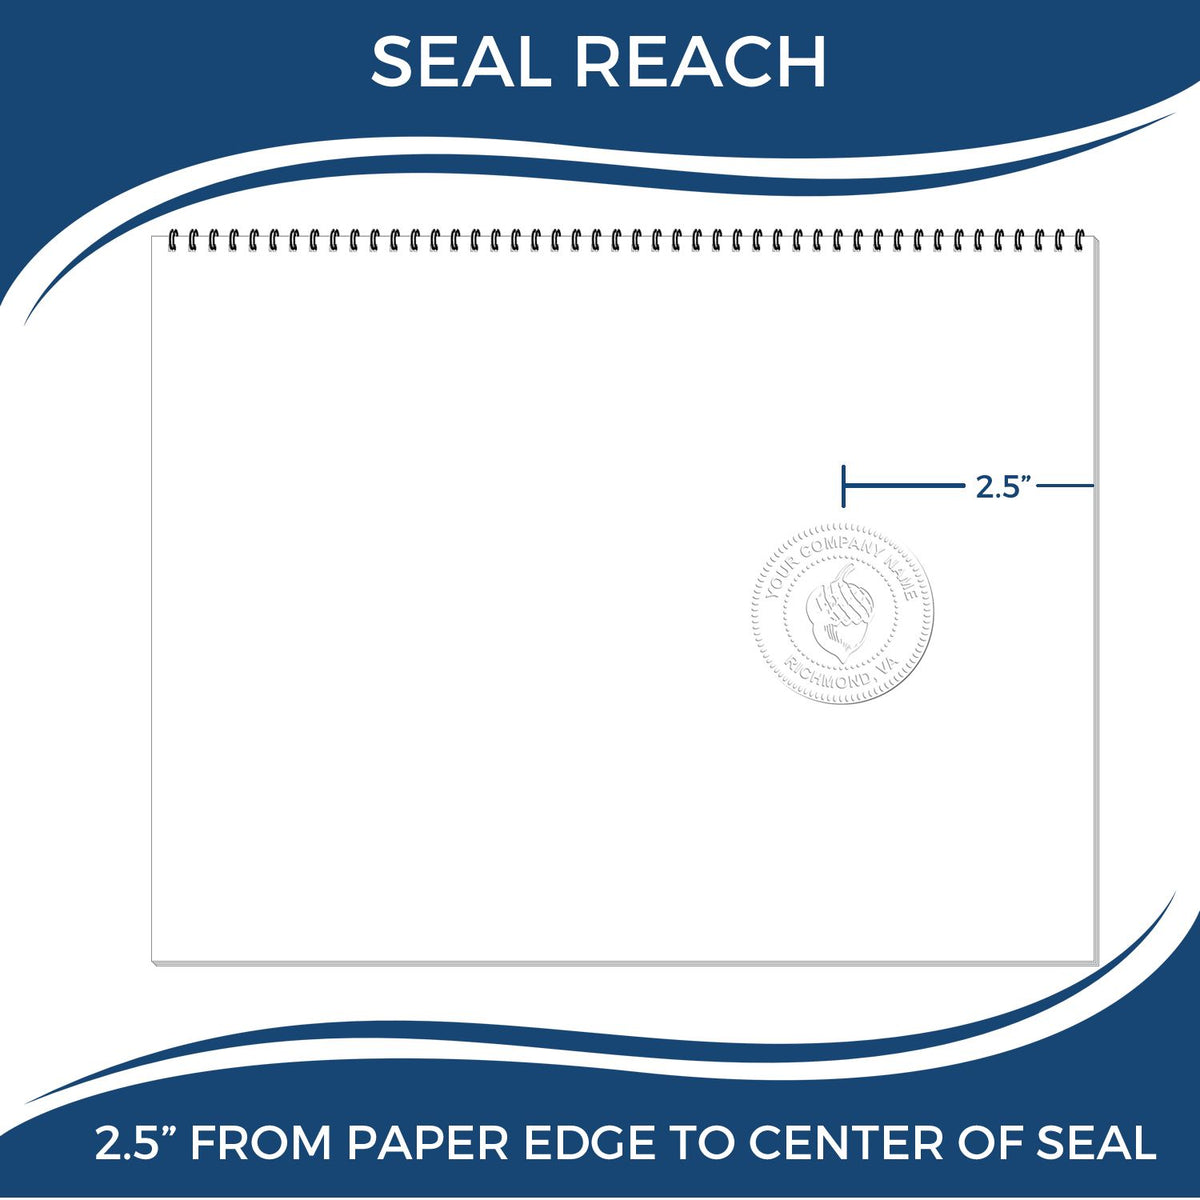 An infographic showing the seal reach which is represented by a ruler and a miniature seal image of the Long Reach Hawaii Land Surveyor Seal